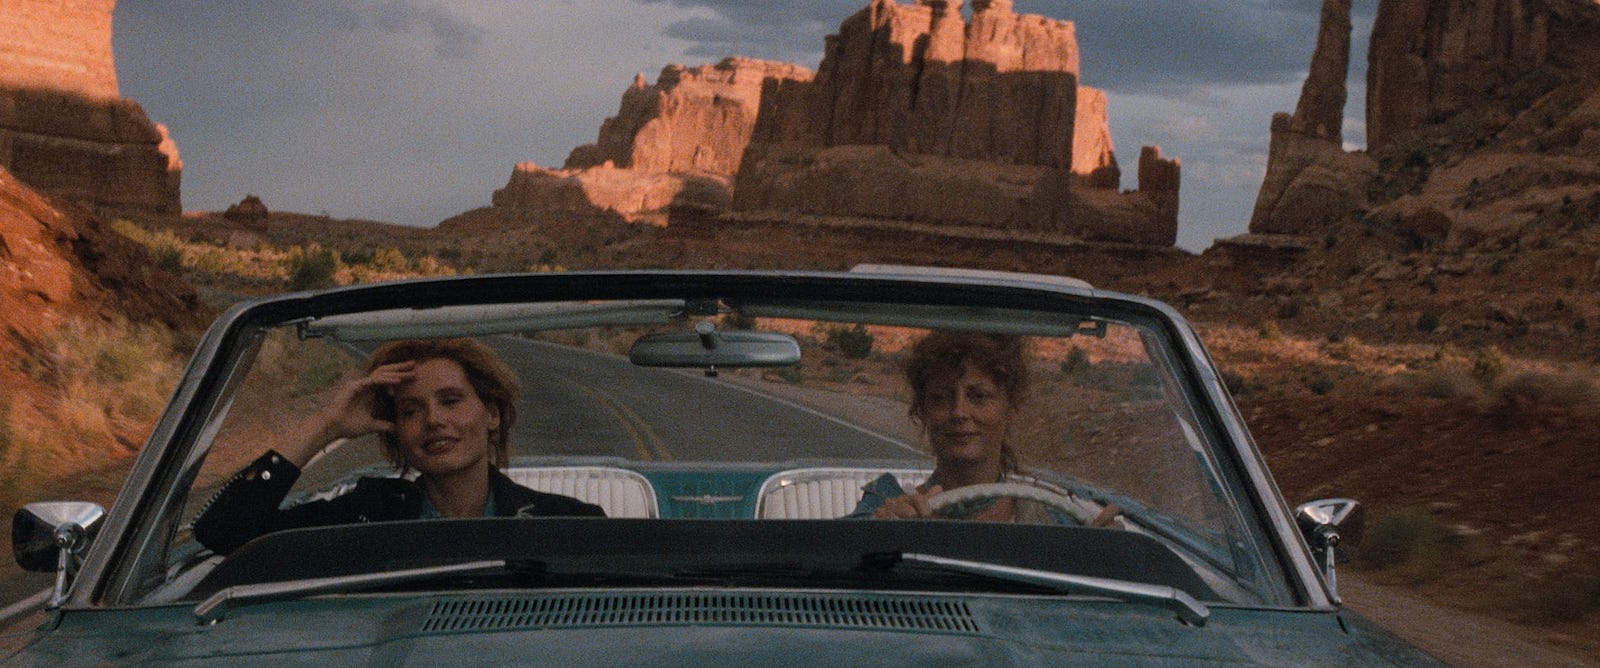 Thelma and Louise - Original Trailer